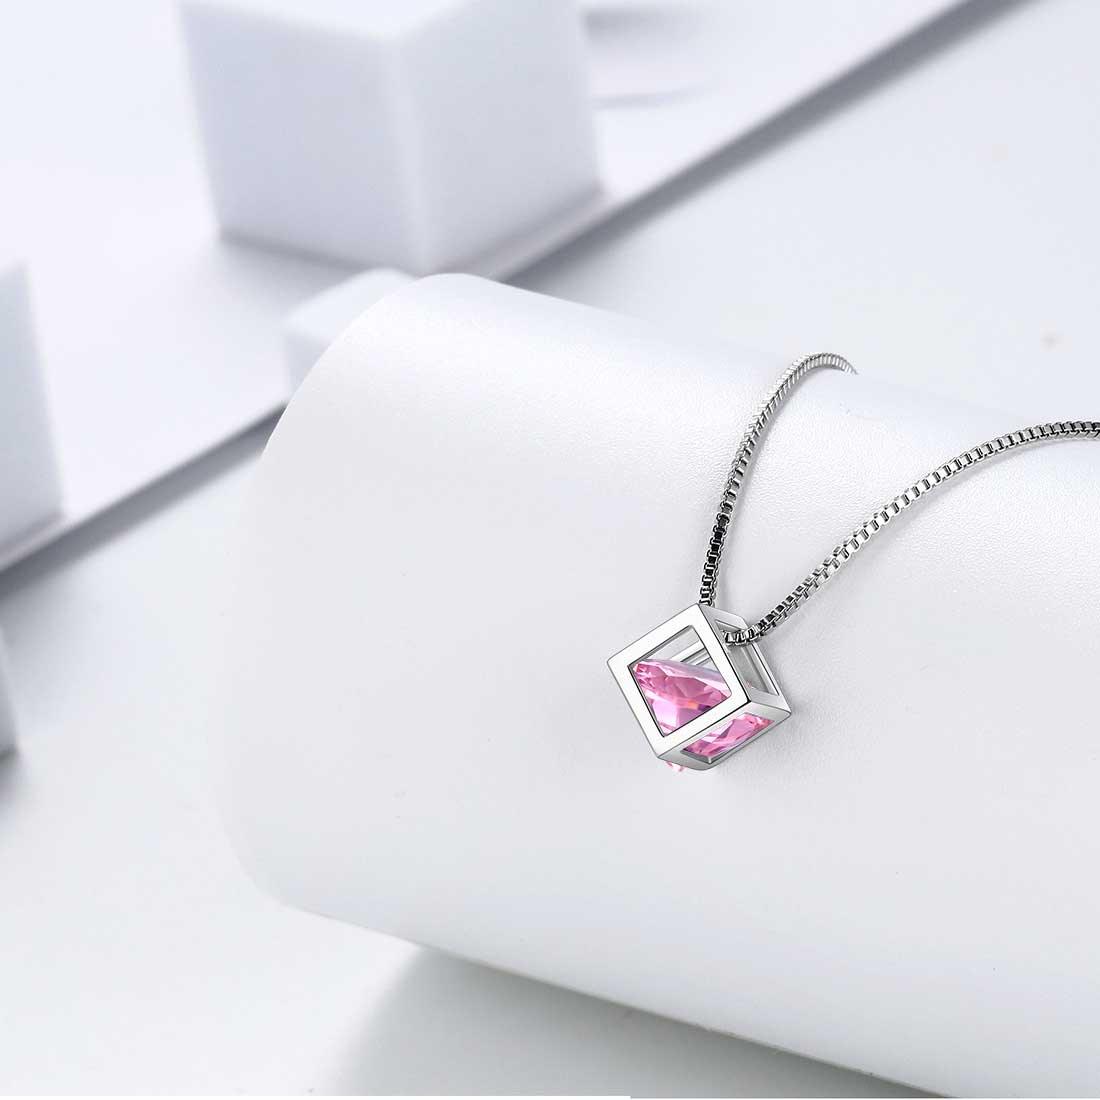 3D Cube Birthstone October Tourmaline Necklace Sterling Silver - Necklaces - Aurora Tears